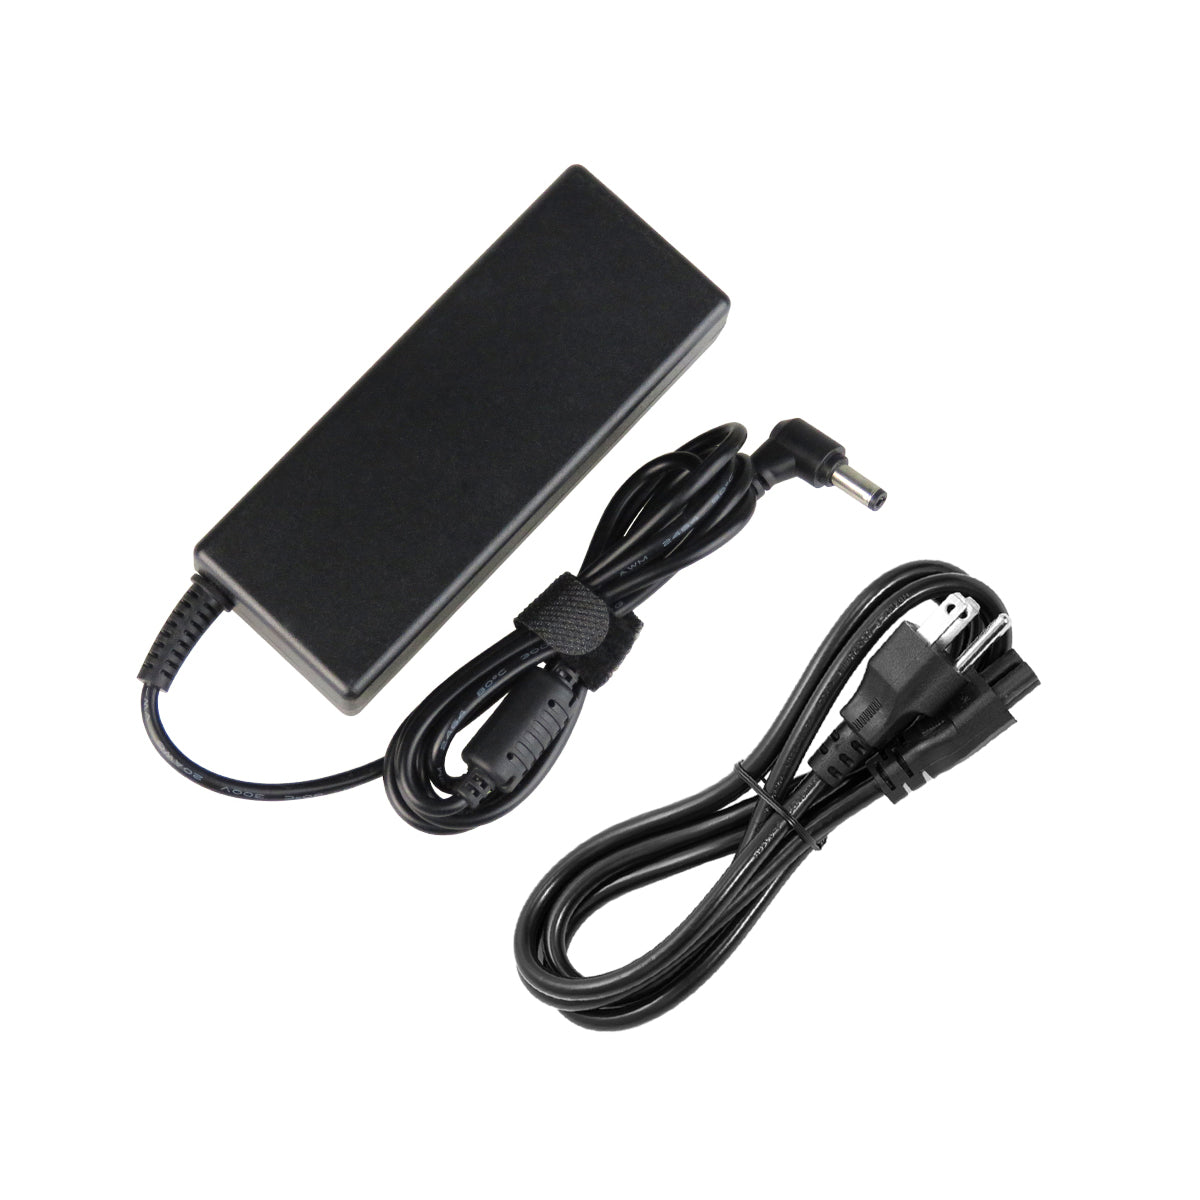 AC Adapter Charger for ASUS N61JV Notebook.